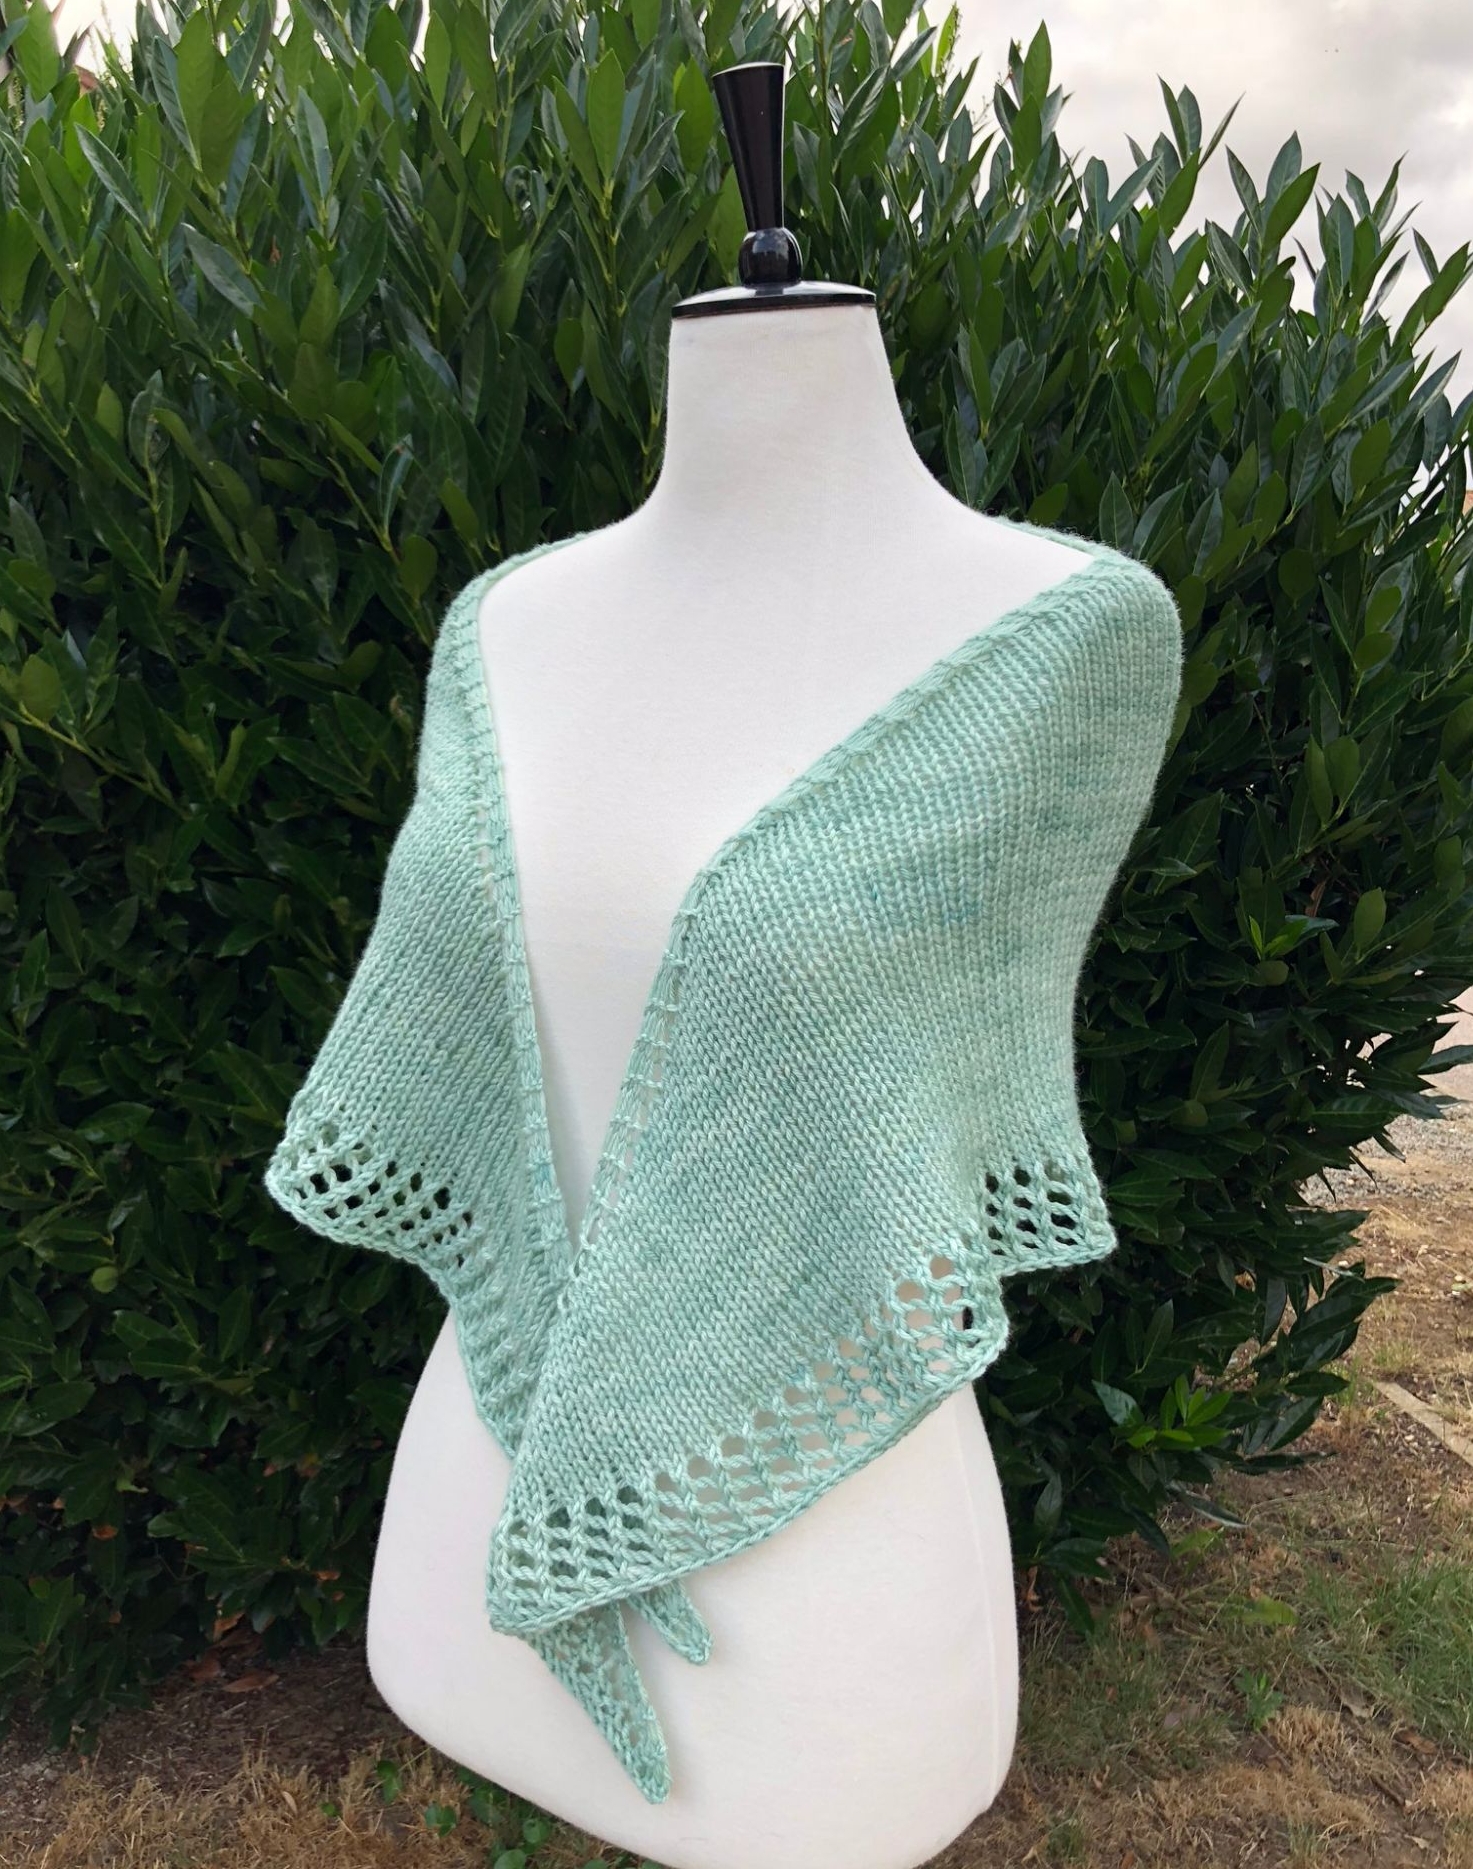 Knitting patterns for speckled yarn – The Craftermath